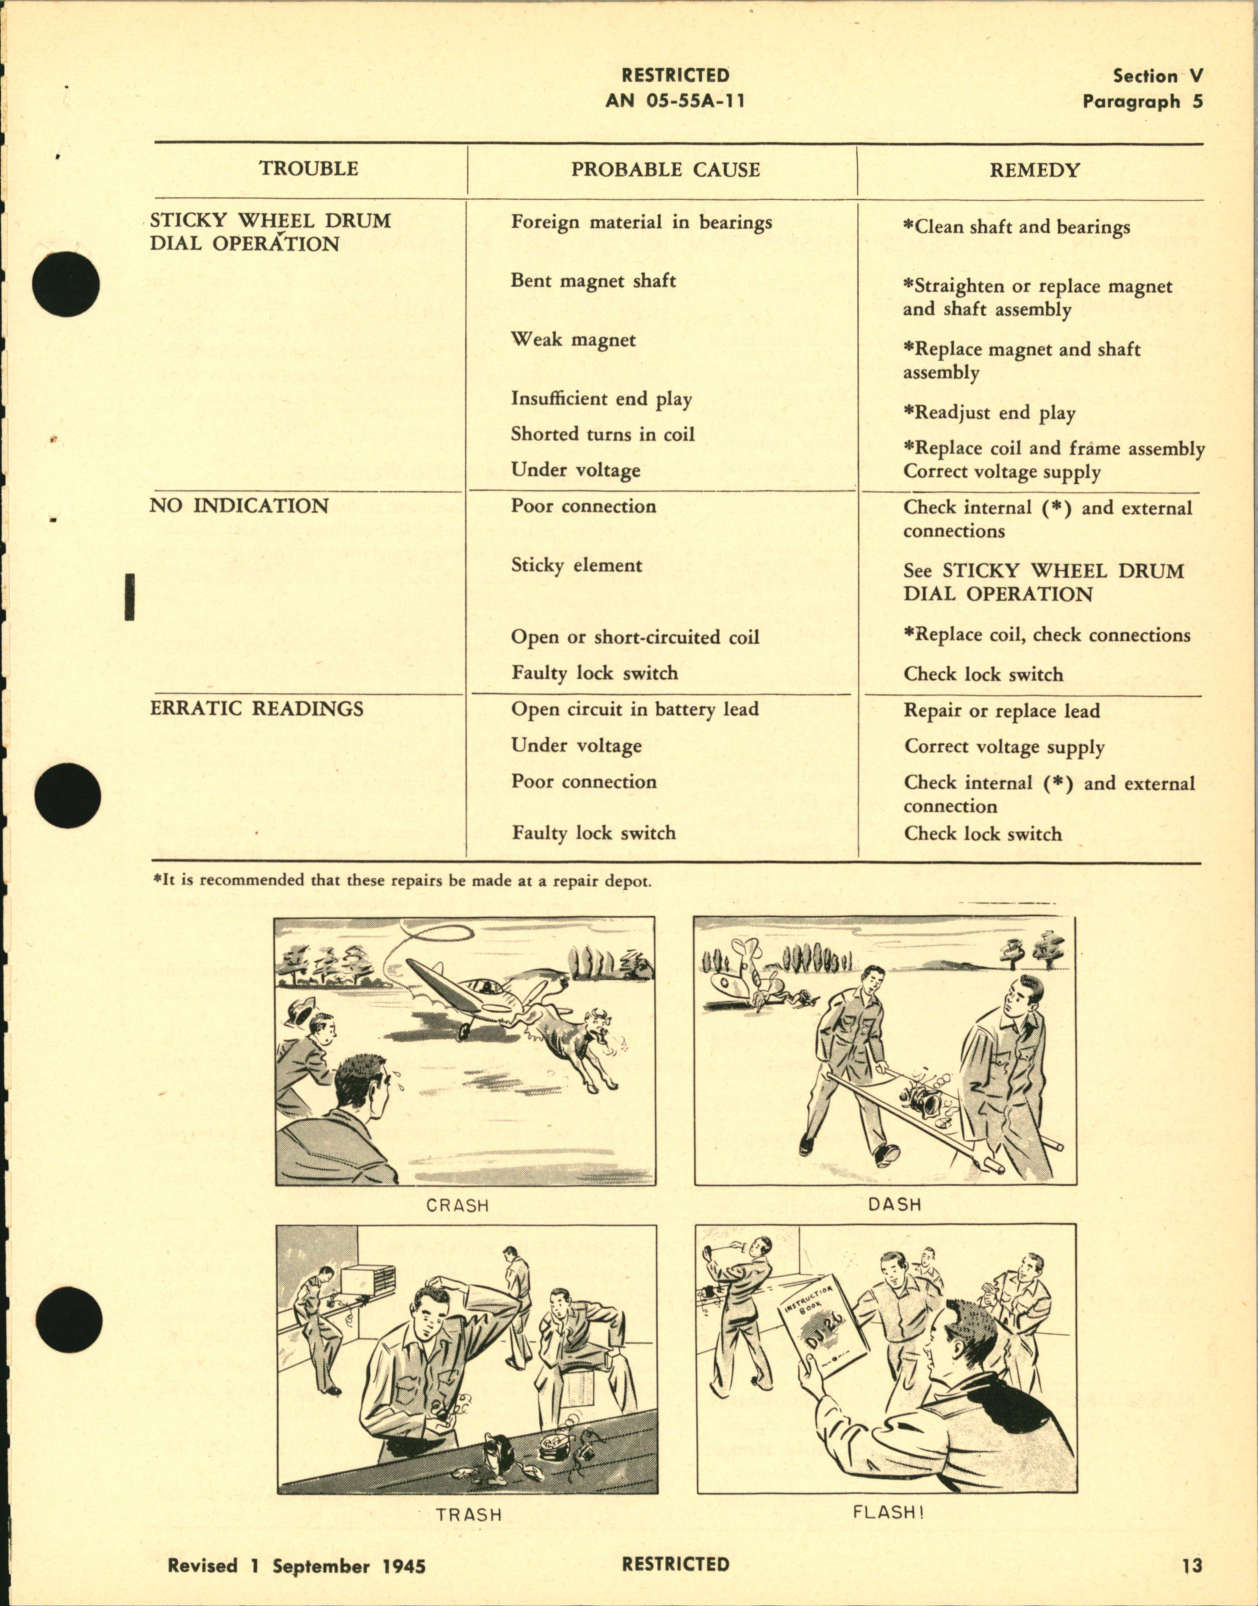 Sample page 6 from AirCorps Library document: Operation, Service, & Overhaul Instructions with Parts Catalog for Landing-Wheels and Flaps Position Indicators